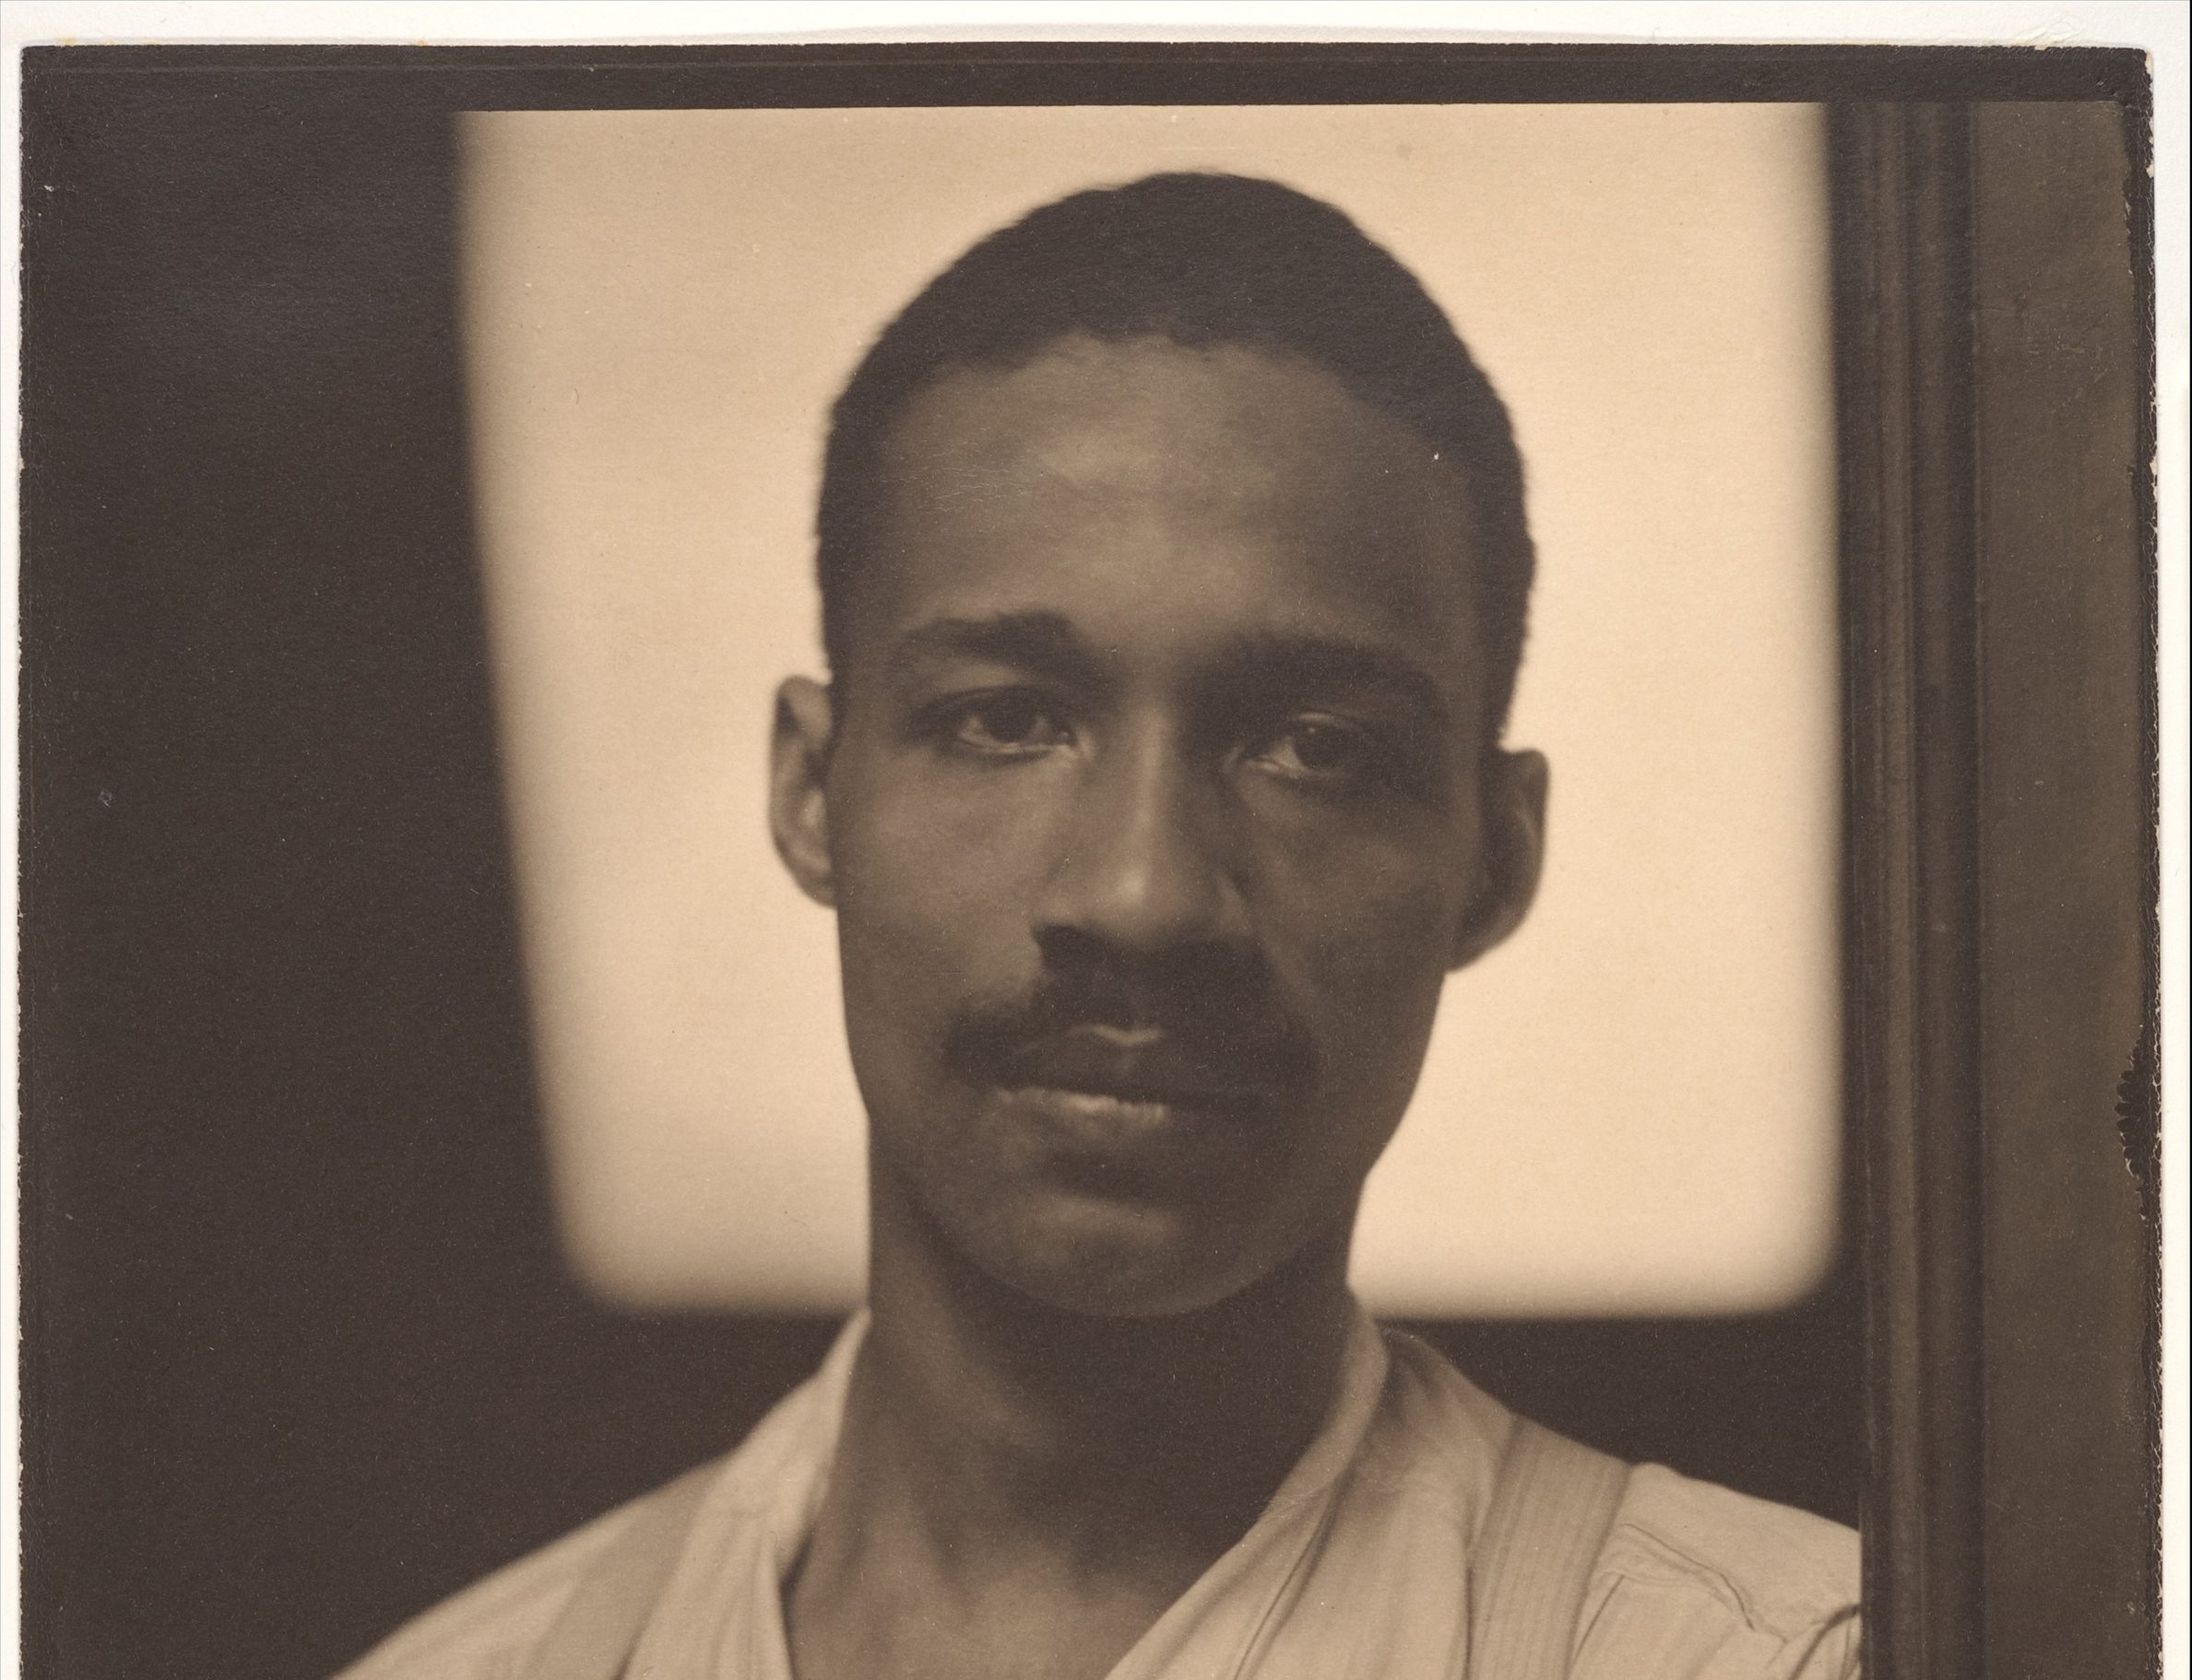 Image of a black man with a mustache wearing a white shirt